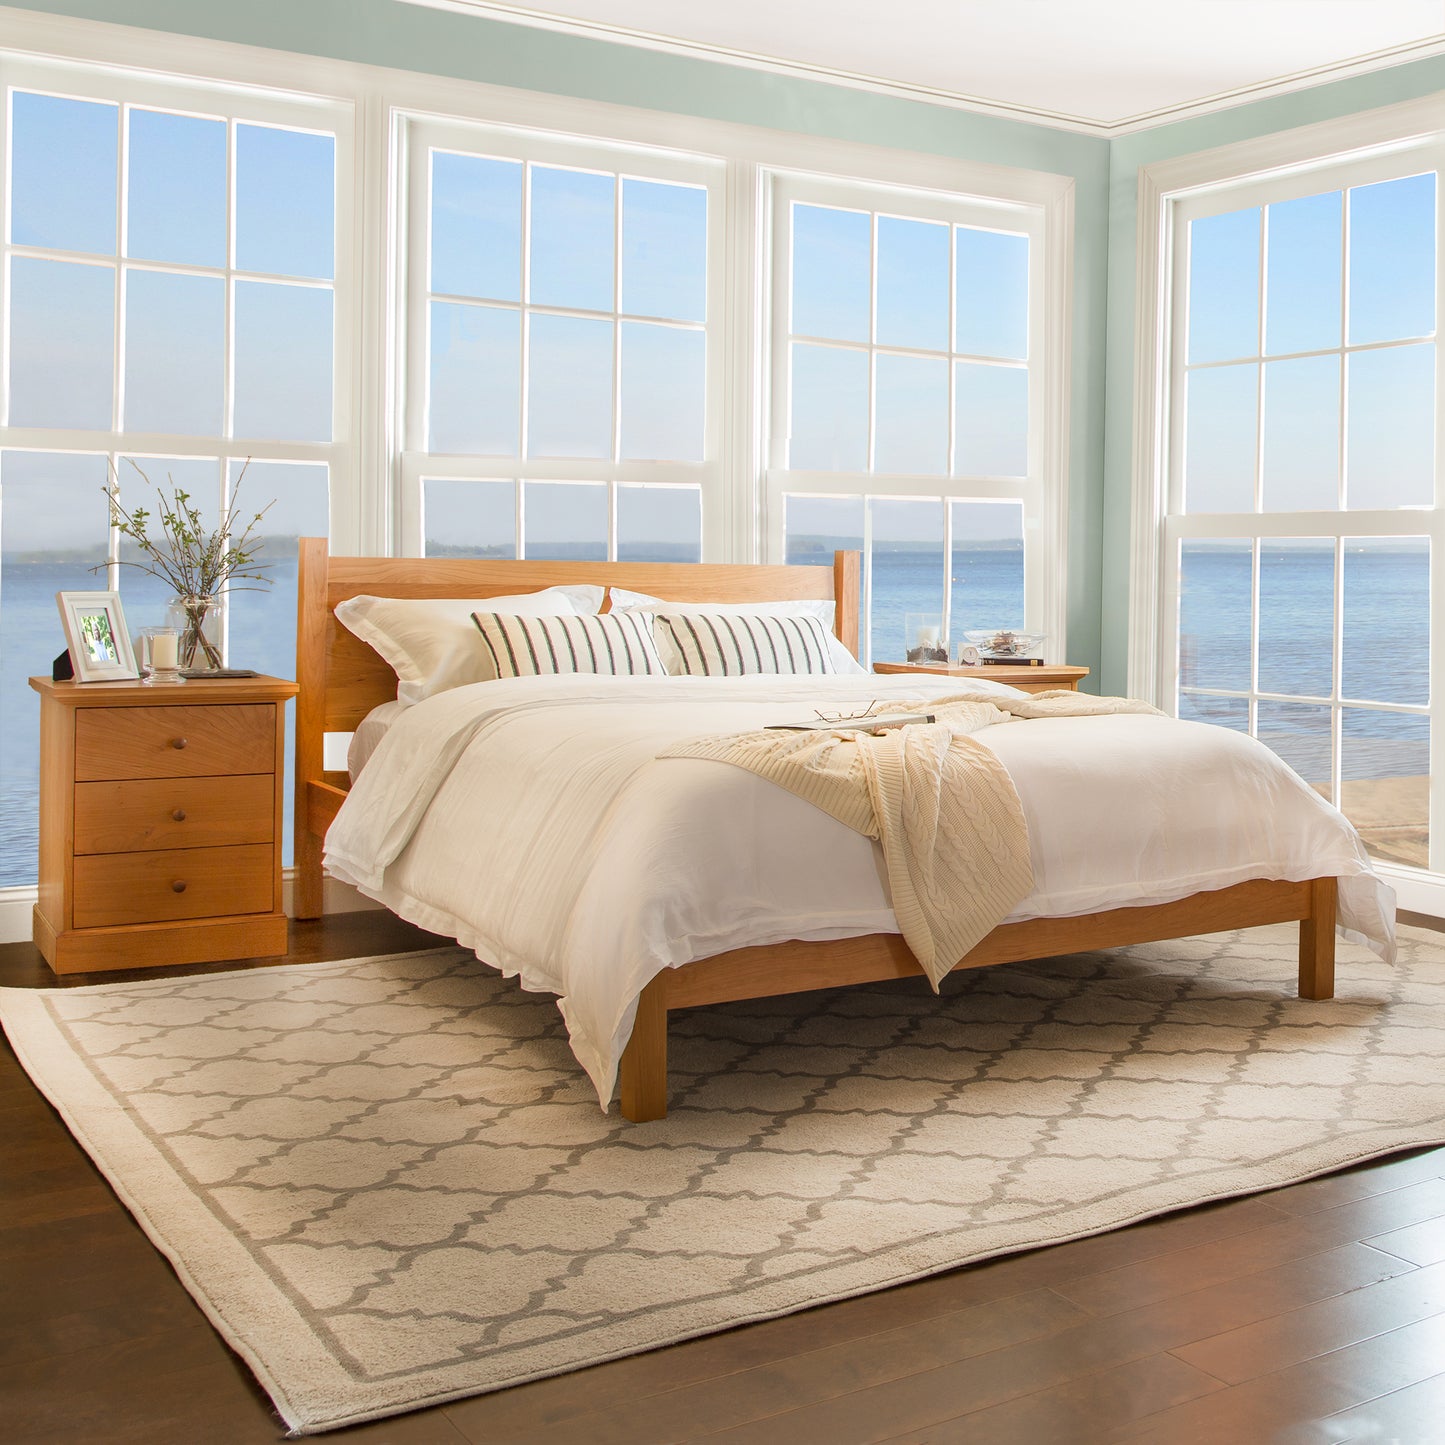 A Classic Wood Bed by Lyndon Furniture in a room with a view of the ocean.